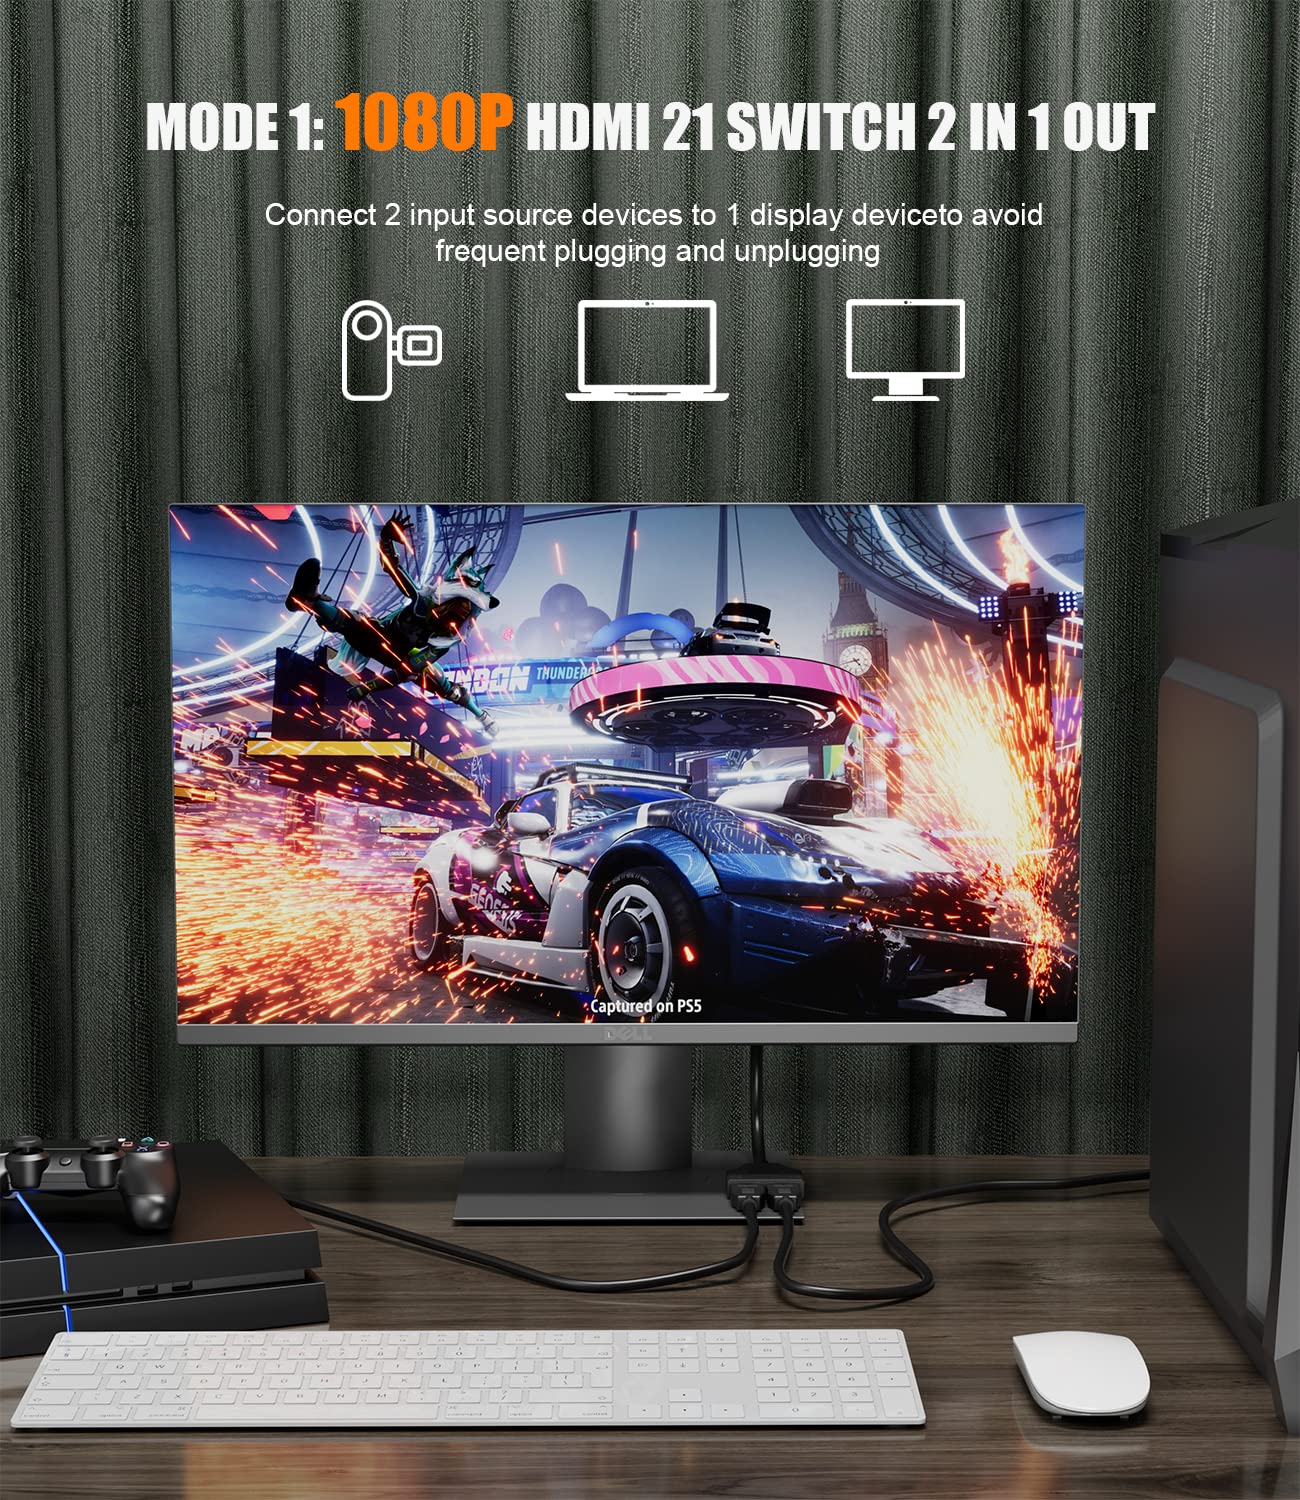 Eanetf HDMI Splitter for Dual Monitors, HDMI Splitter 1 in 2 Out,1080P Male to Dual HDMI Female 1 to 2 Channels HDMI Splitter Adapter for HDMI HD, LED, LCD, TV,Two The Same TVs at The Same Time